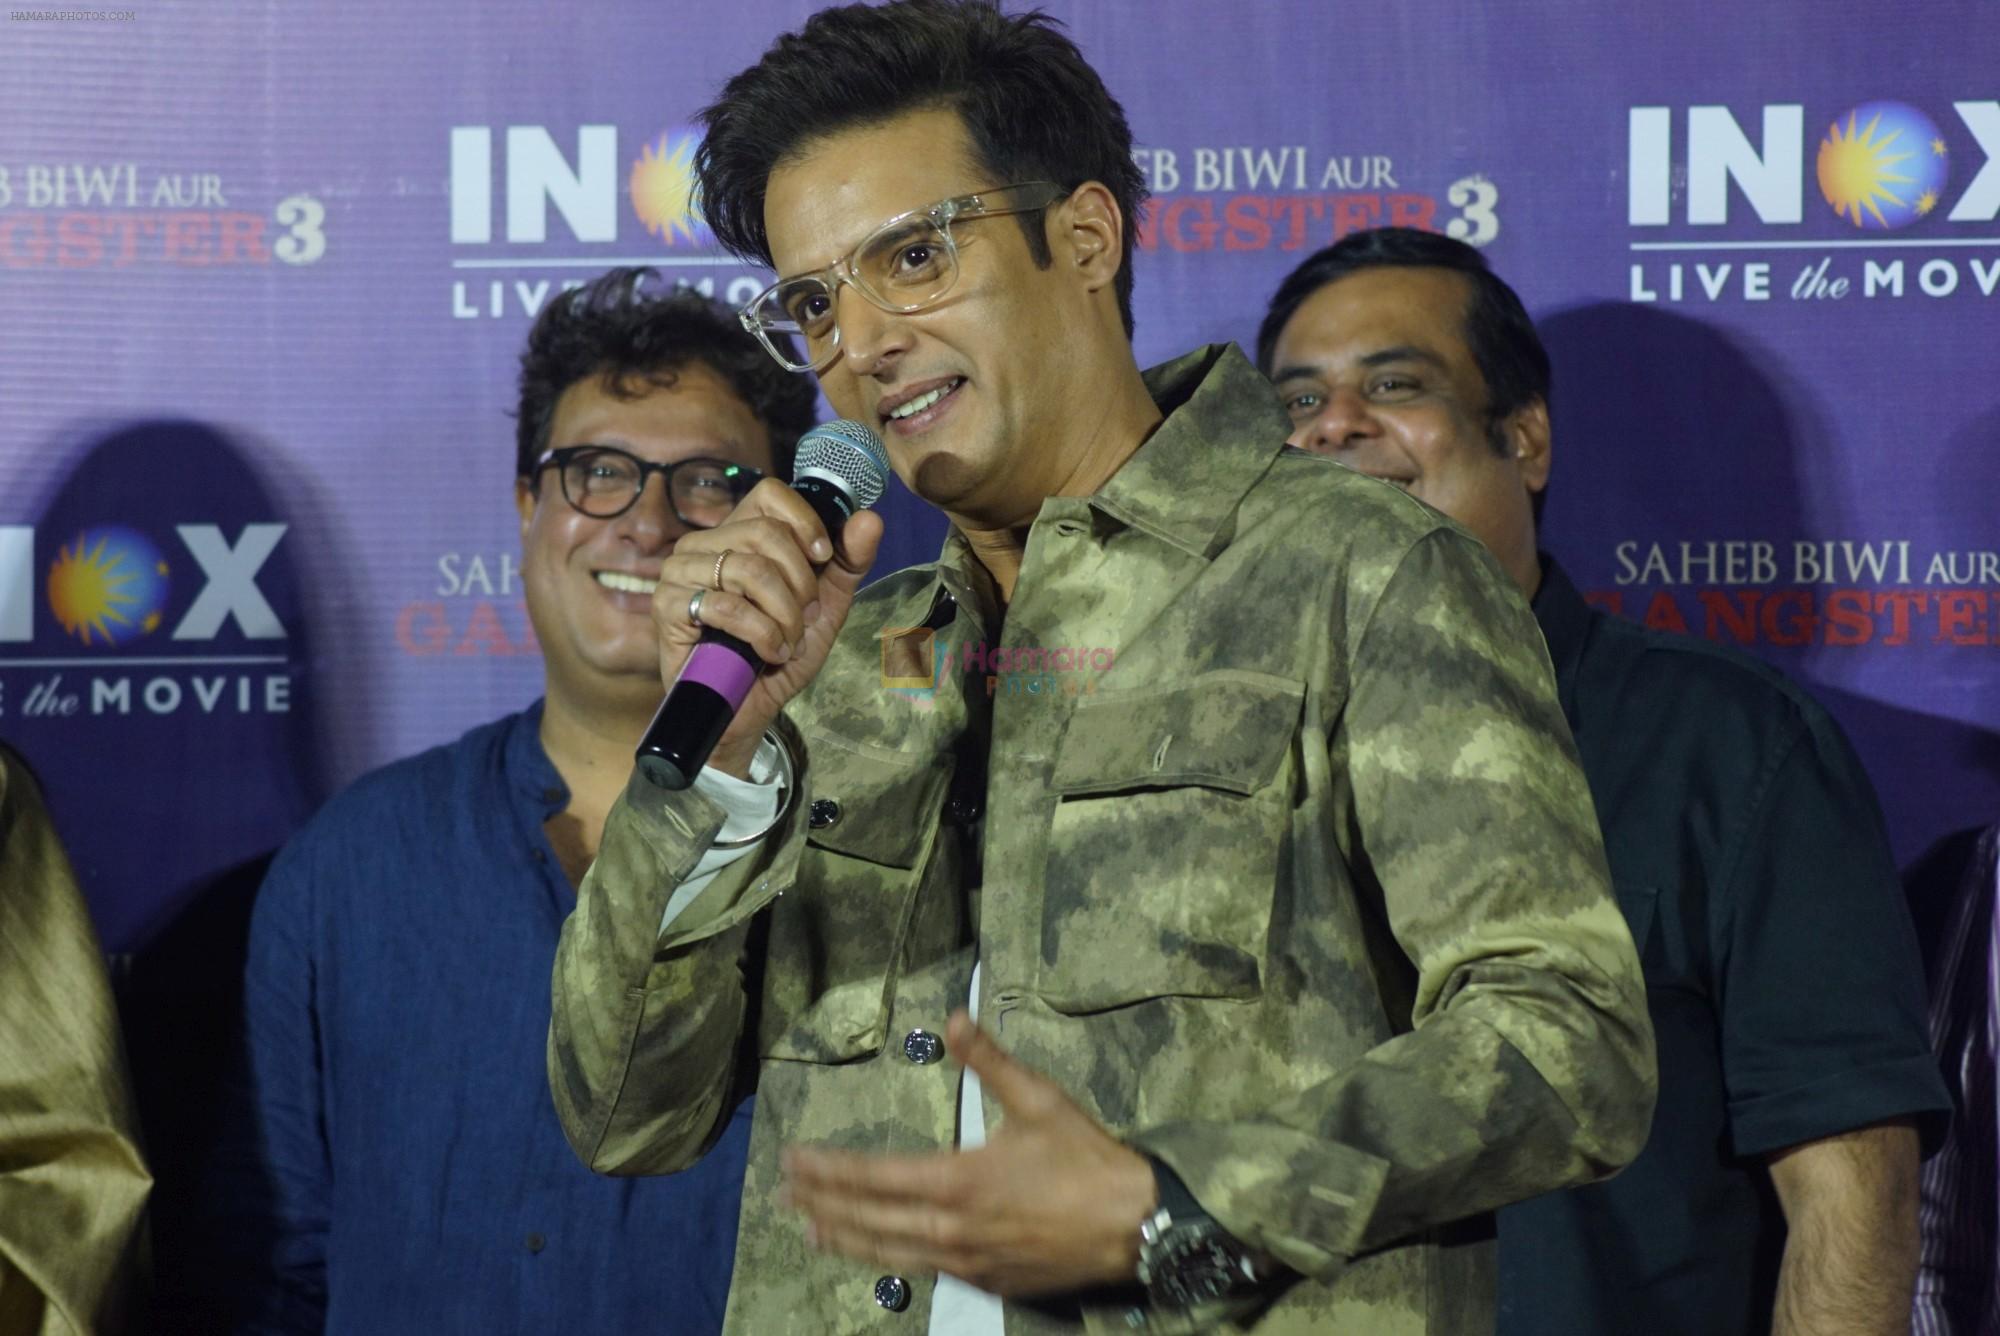 Jimmy Shergill at the Song Lauch Of Saheb Biwi Aur Gangster 3 on 23rd July 2018